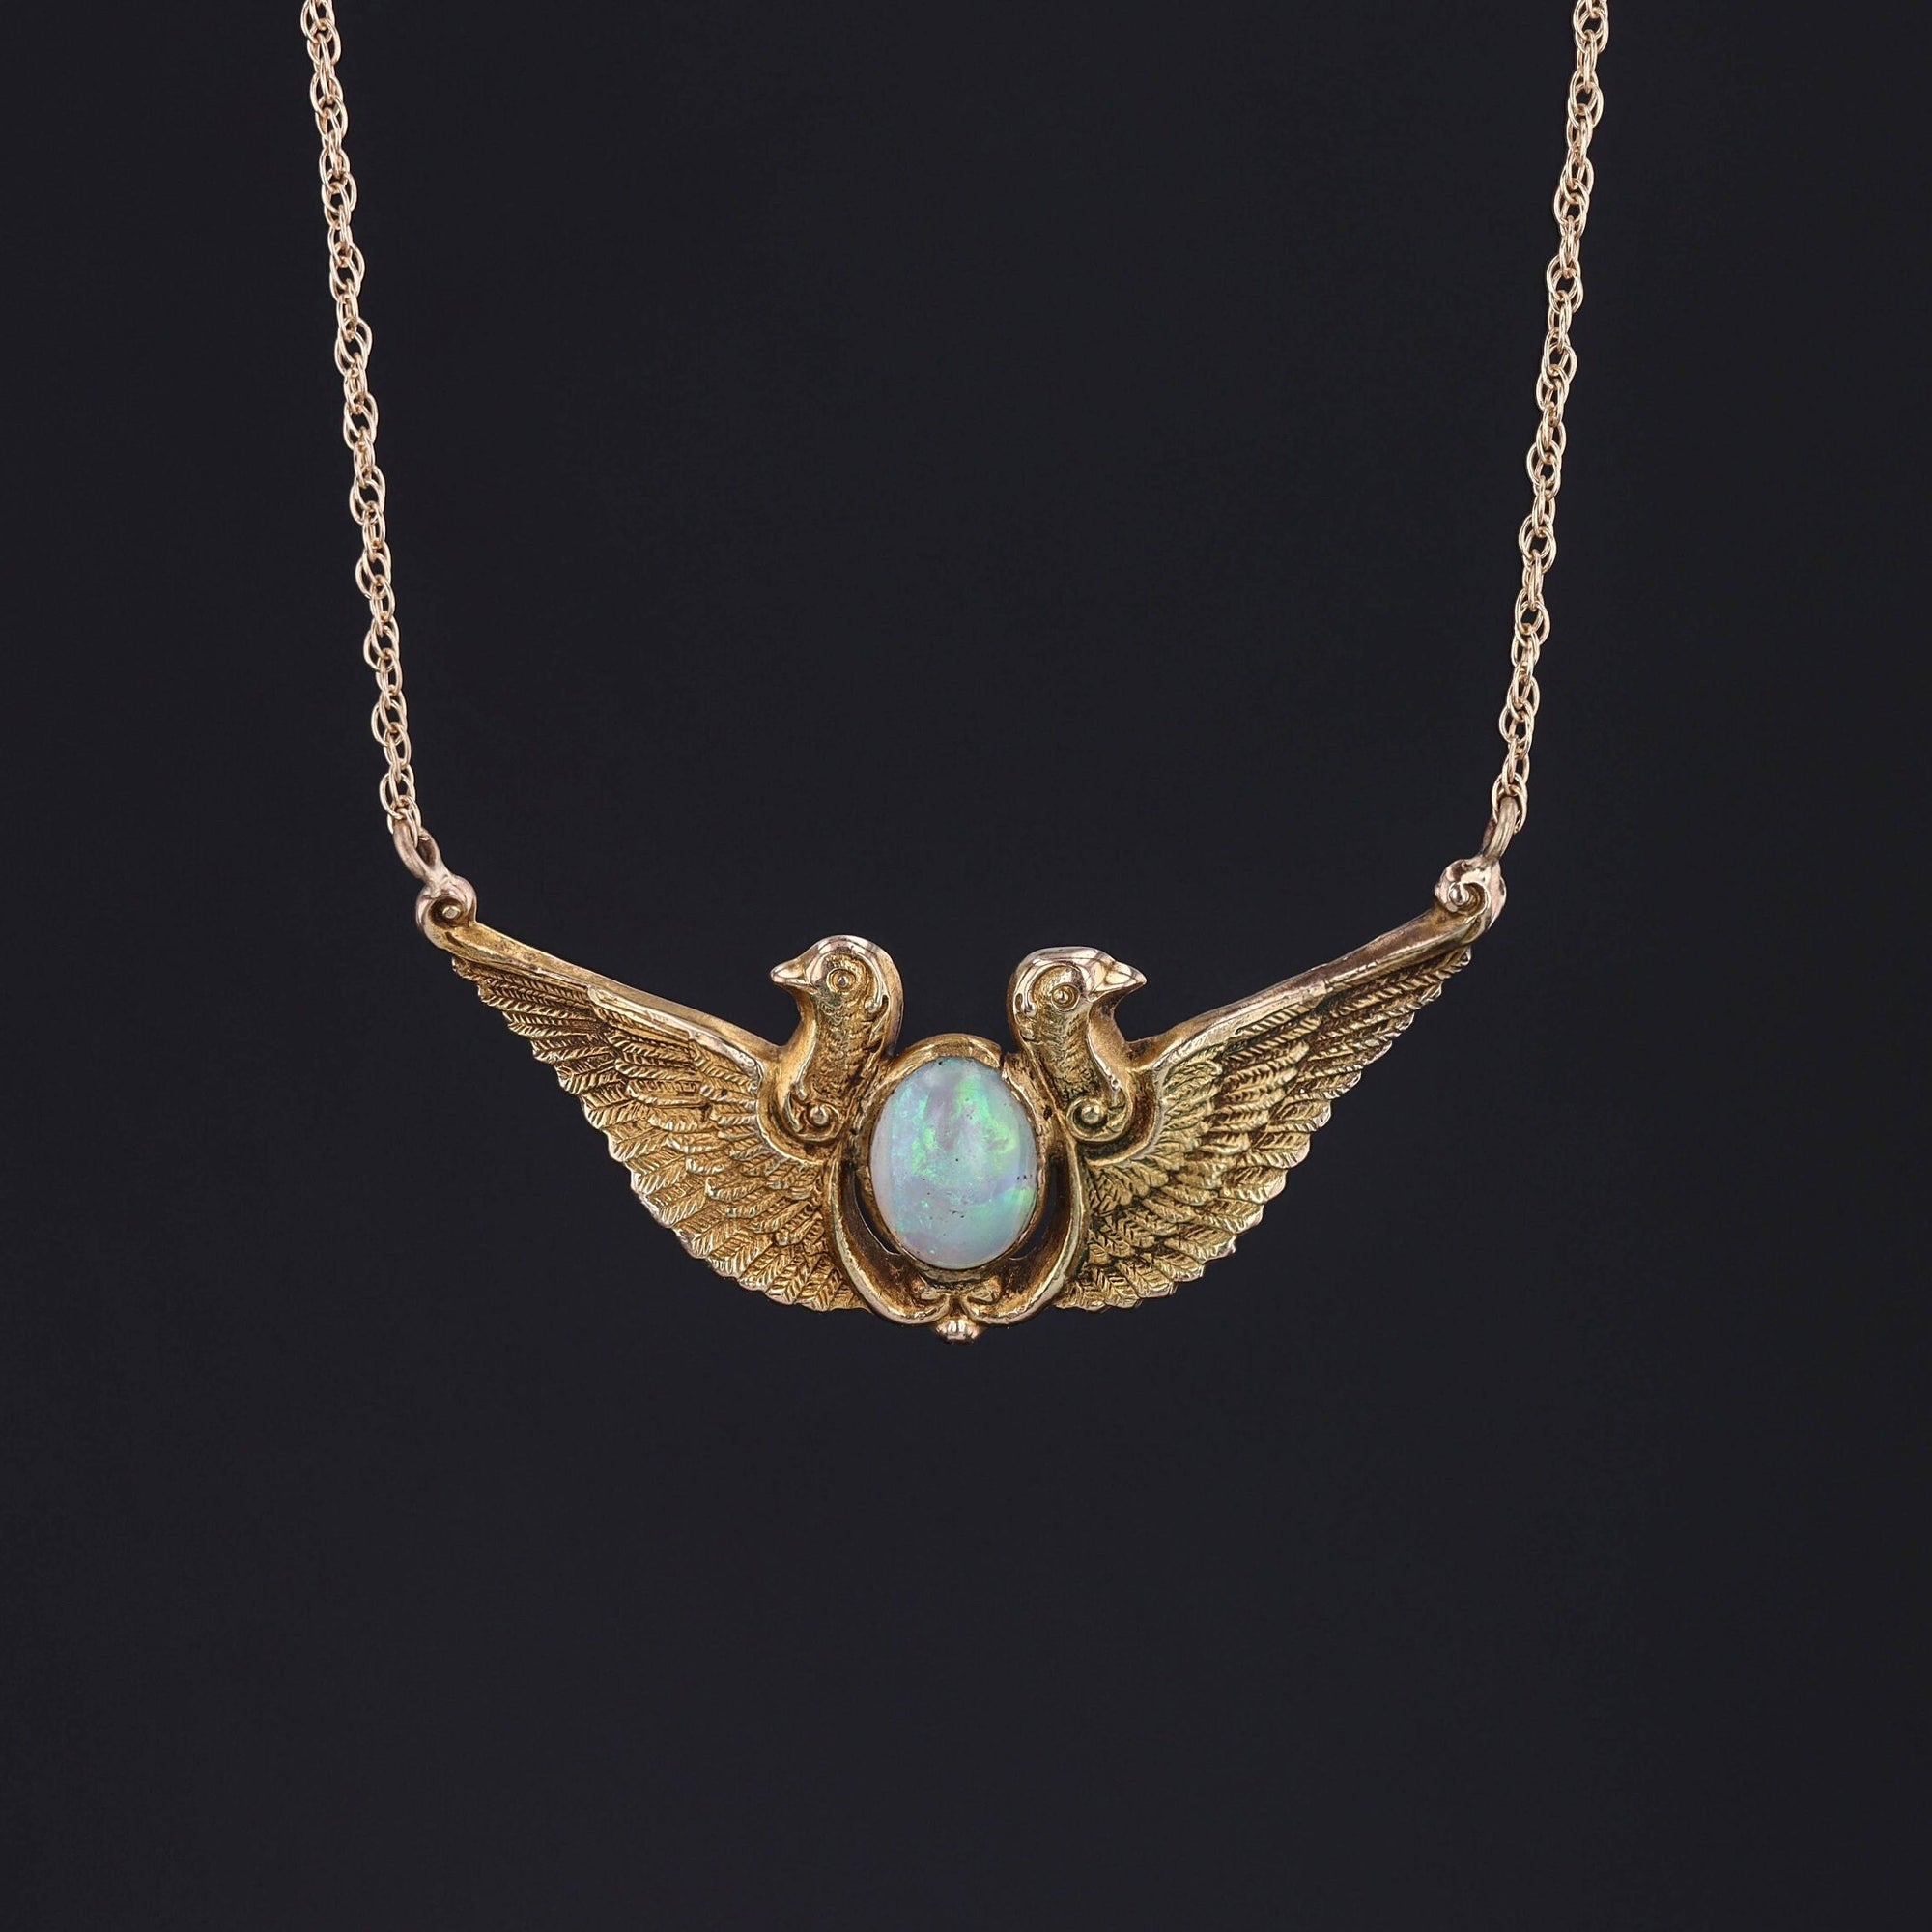 Egyptian Revival Necklace with 10k Gold and Opal Pendant on 14k Chain | Antique Pin Conversion